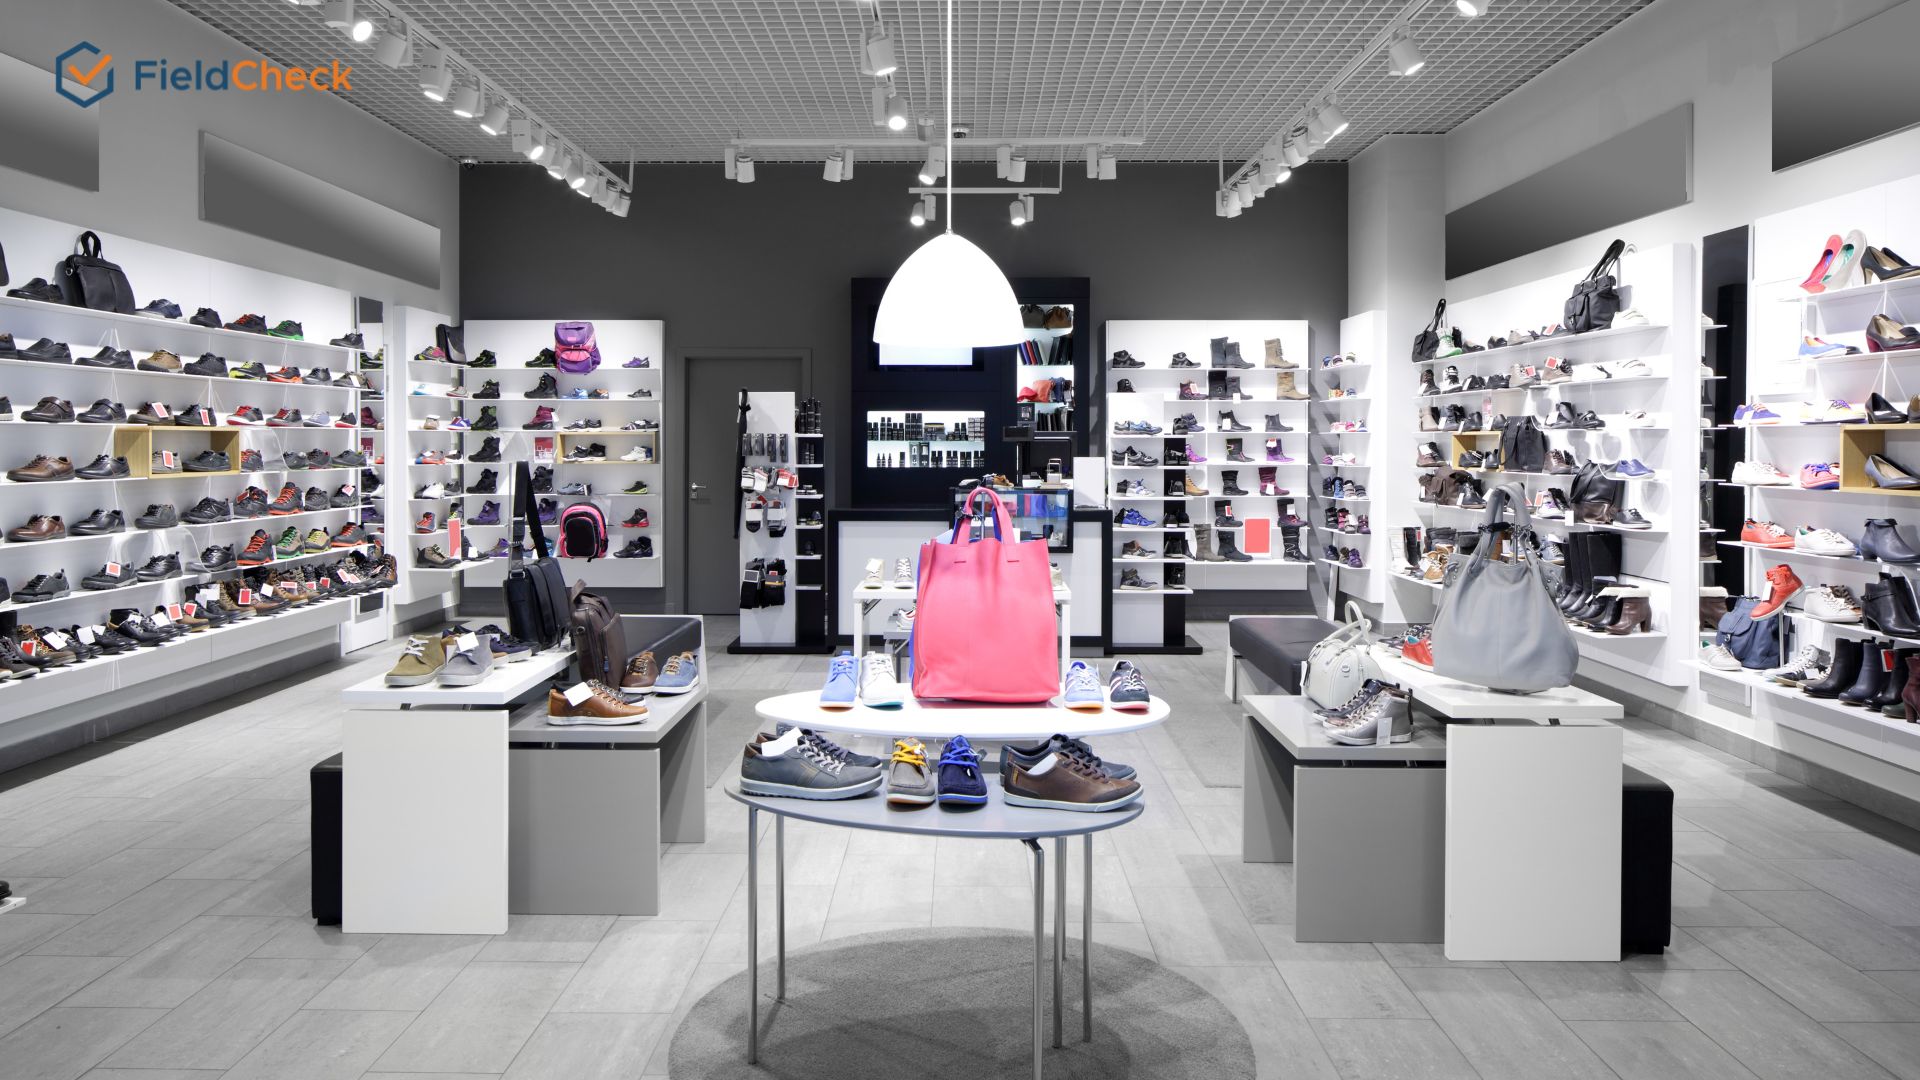 How To Improve Retail Operations Management to Get Ahead of The Game